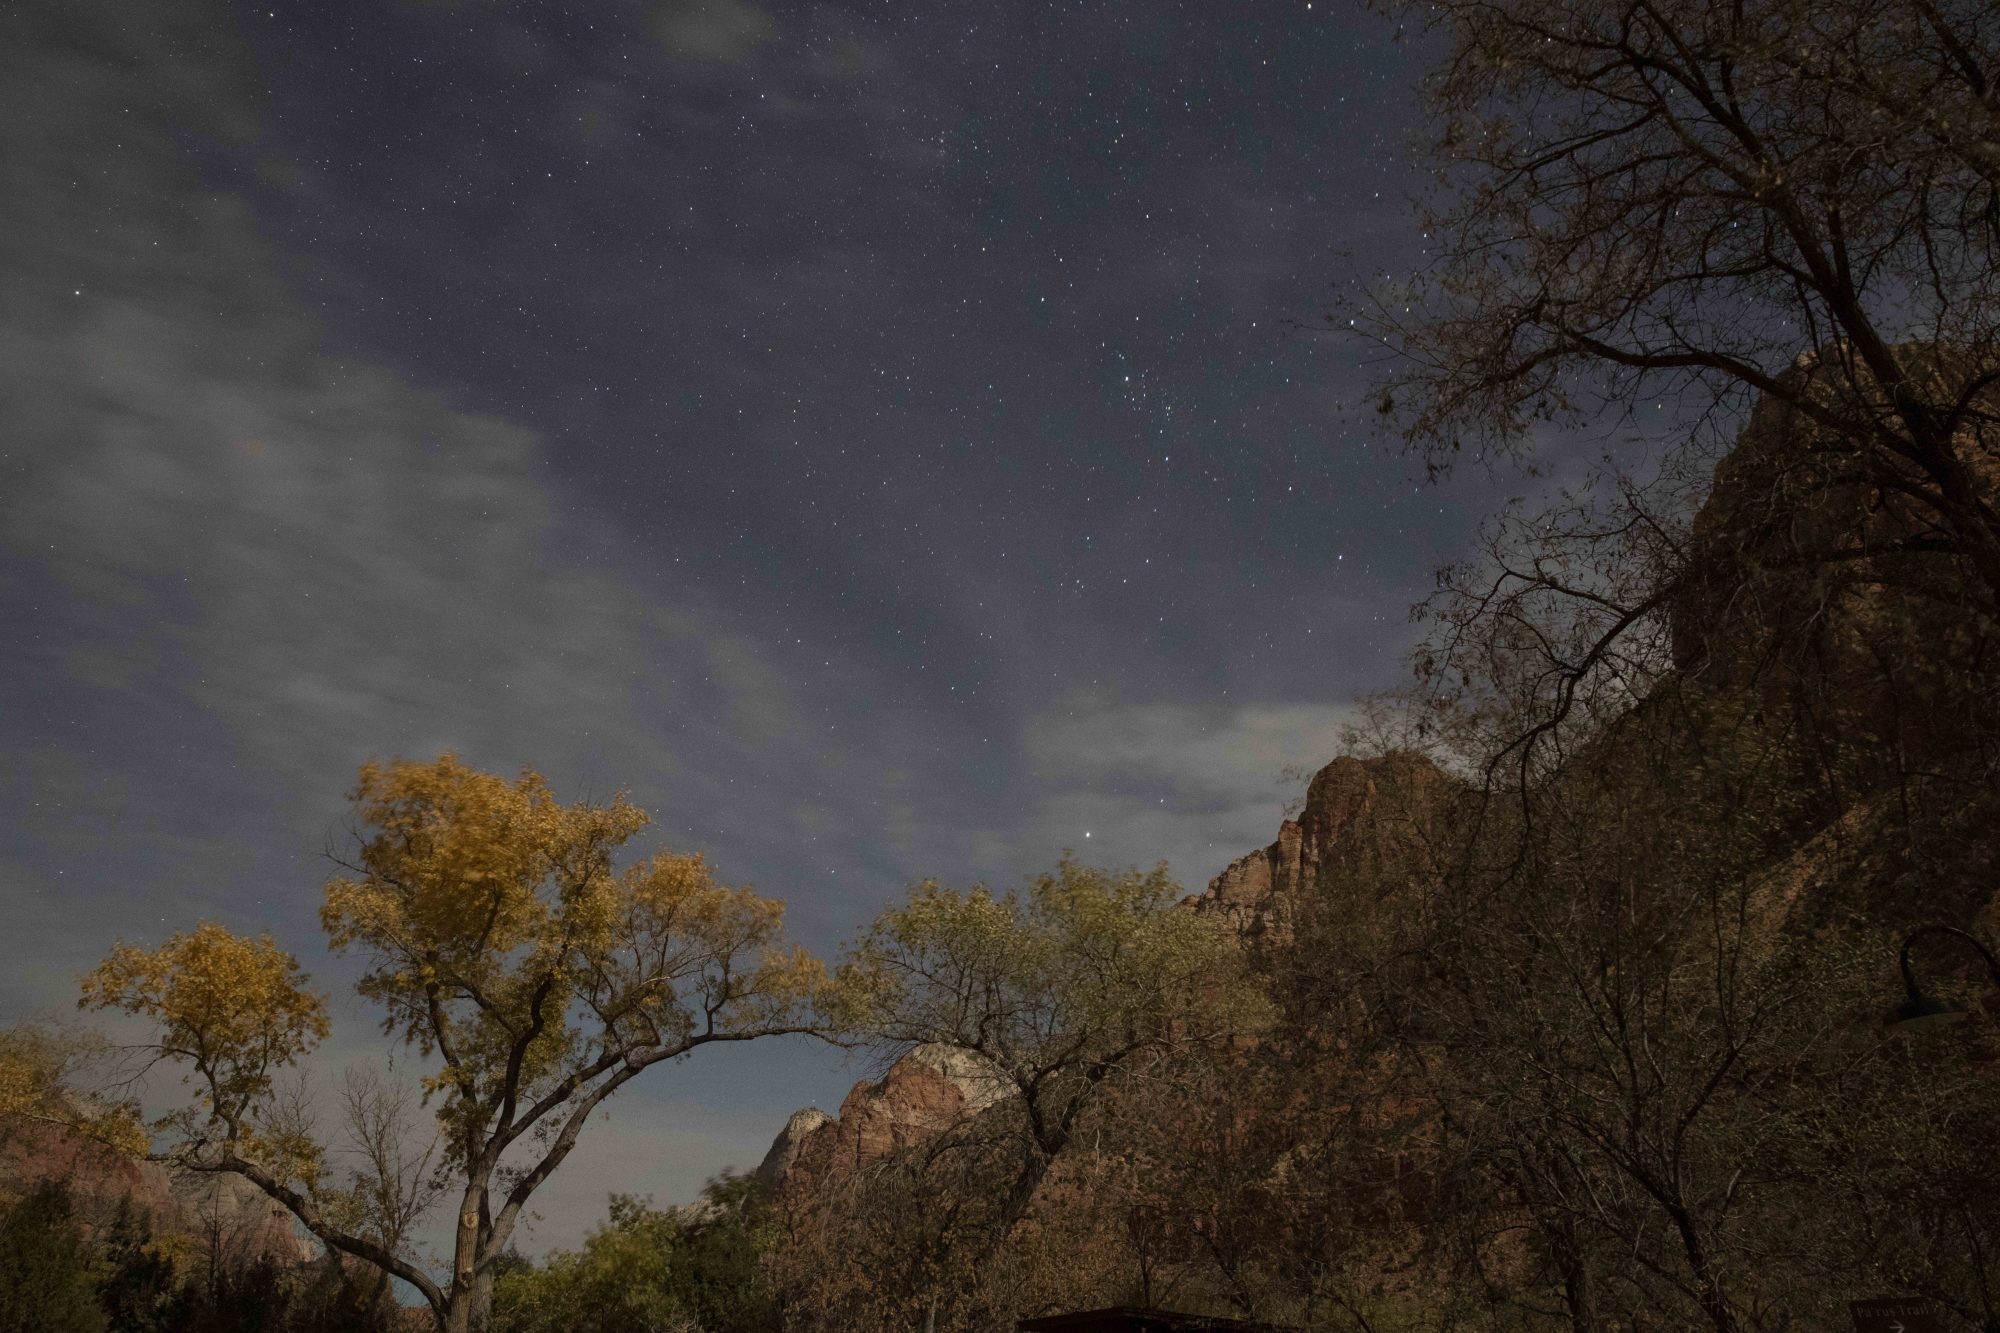 Zion National Park at night with stars shining through and above the clouds